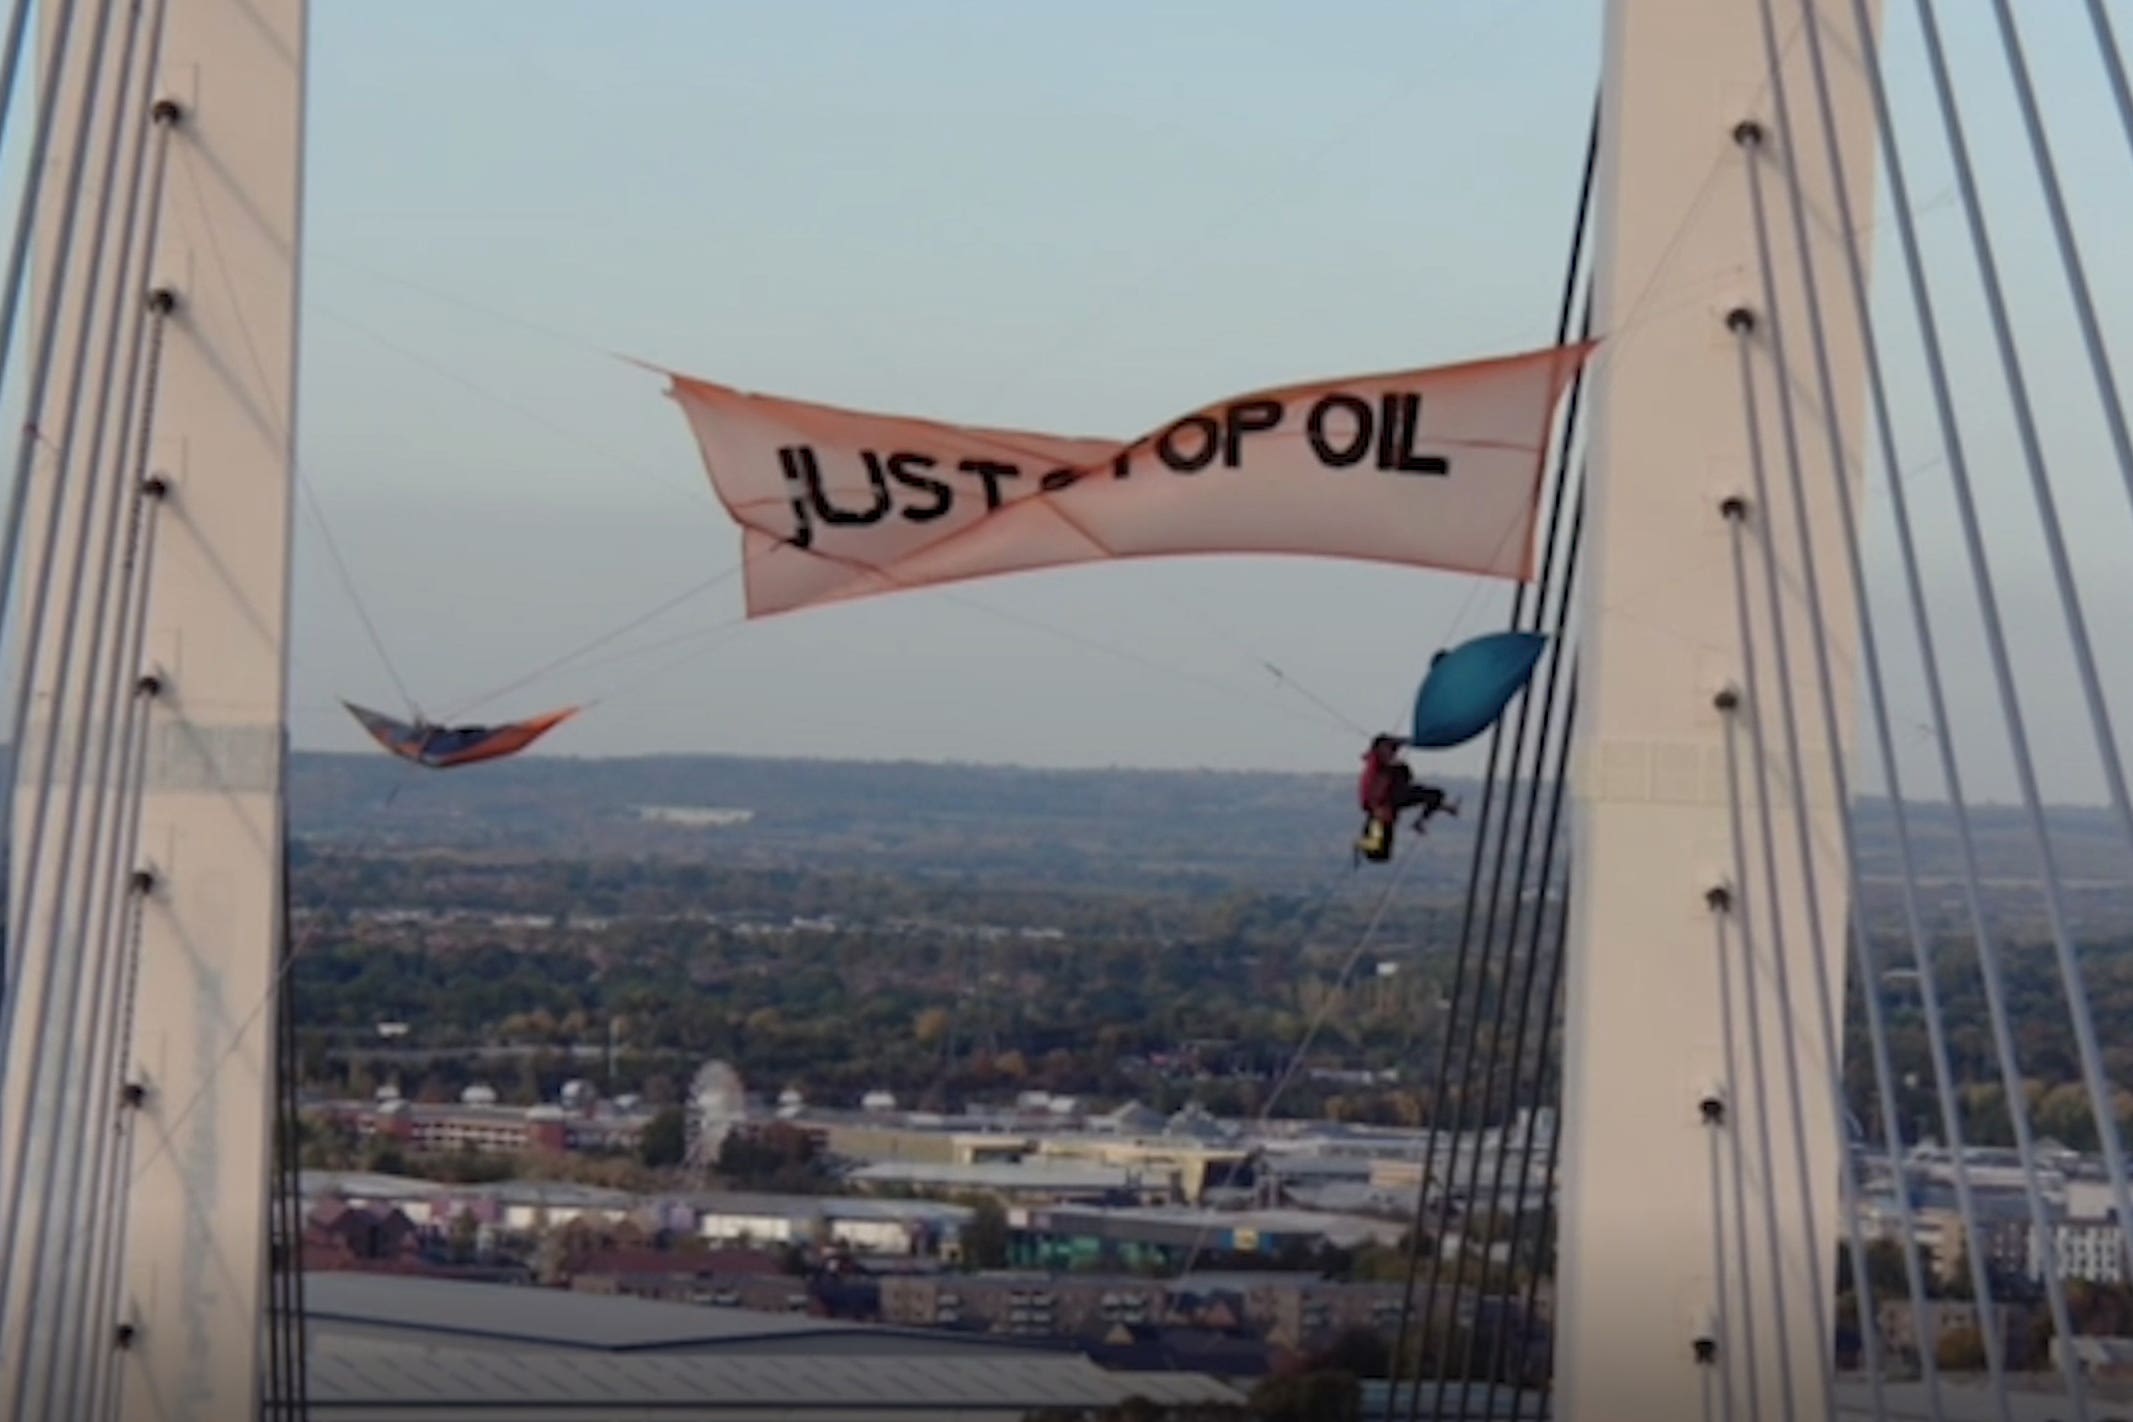 Two Just Stop Oil protesters, Morgan Trowland and Marcus Decker, scaled a bridge on the Dartford Crossing